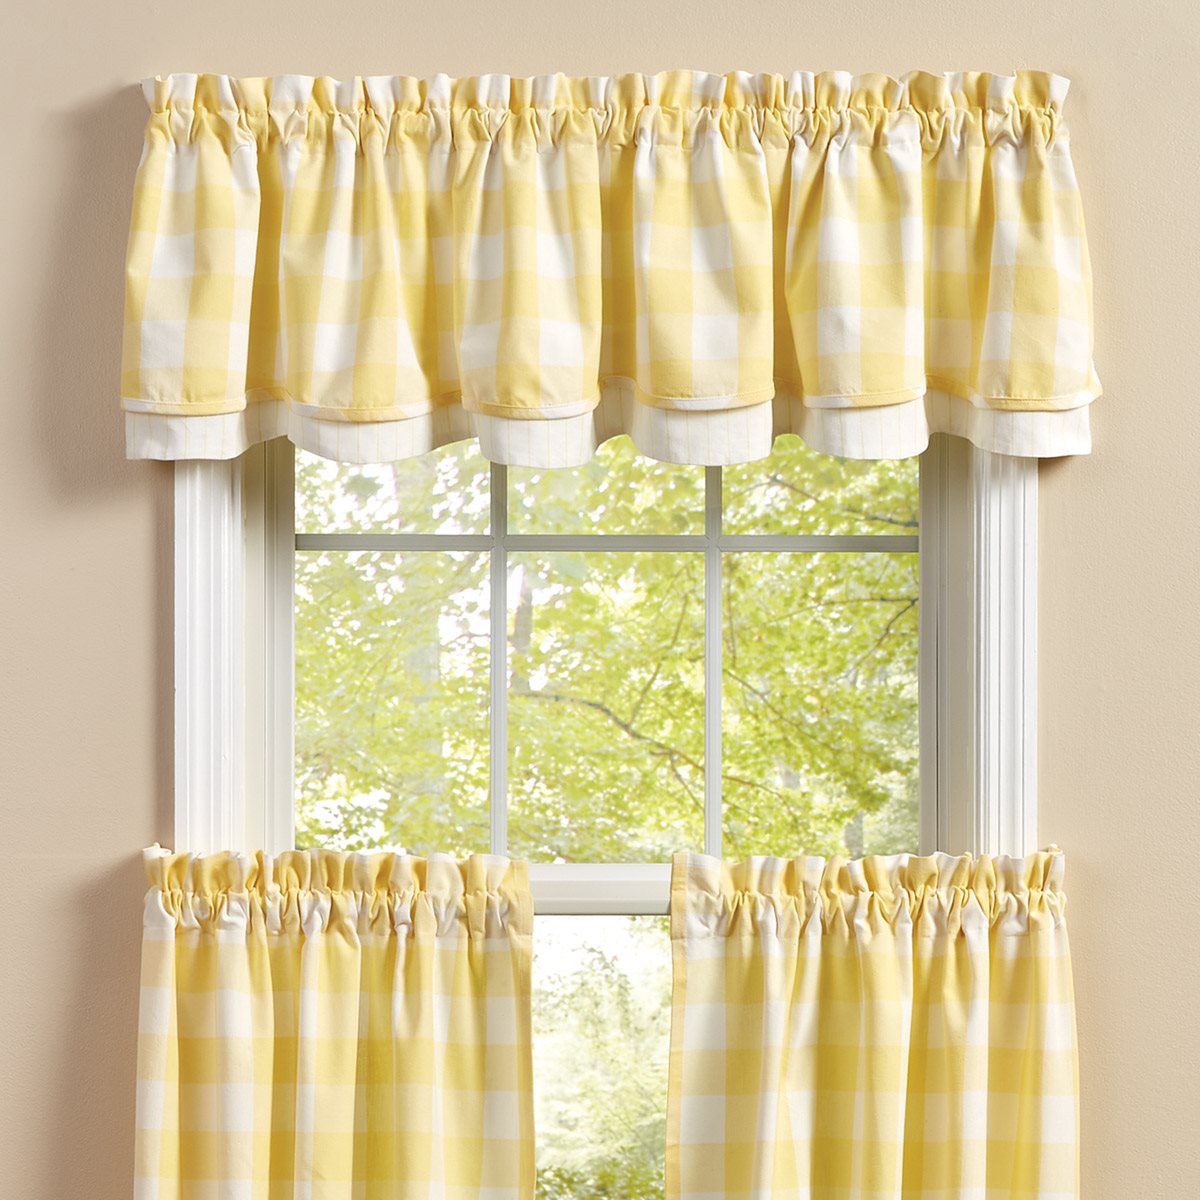 Wicklow Check Lined Layered Valance 72X16 Yellow